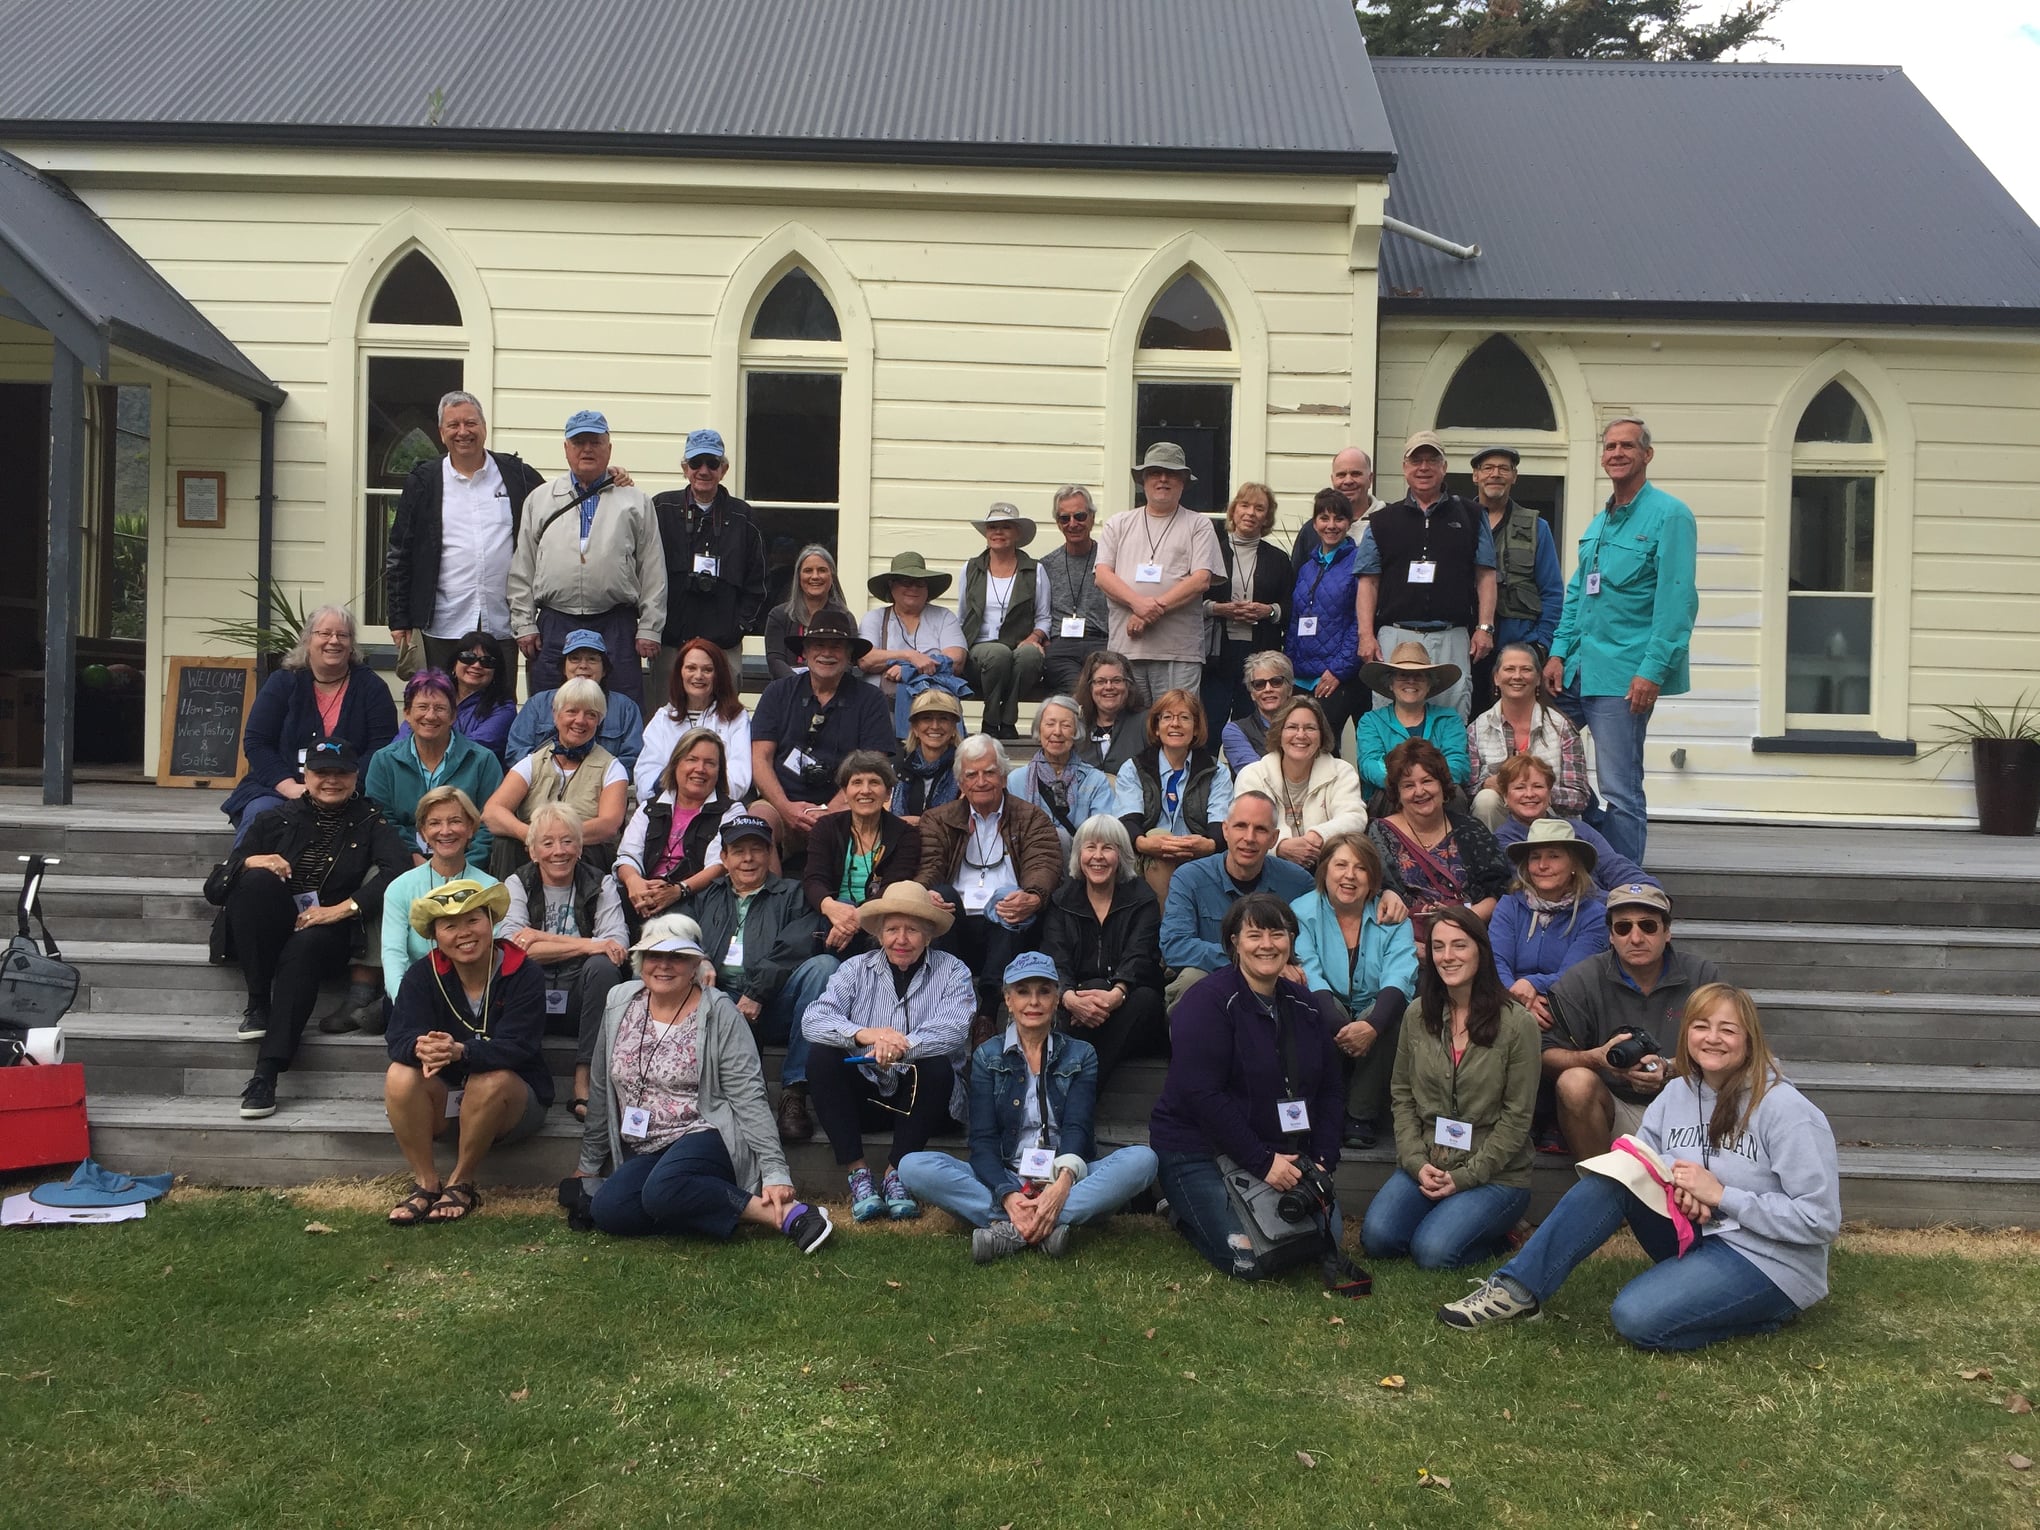 A group photo from a previous Publisher's Invitational in New Zealand